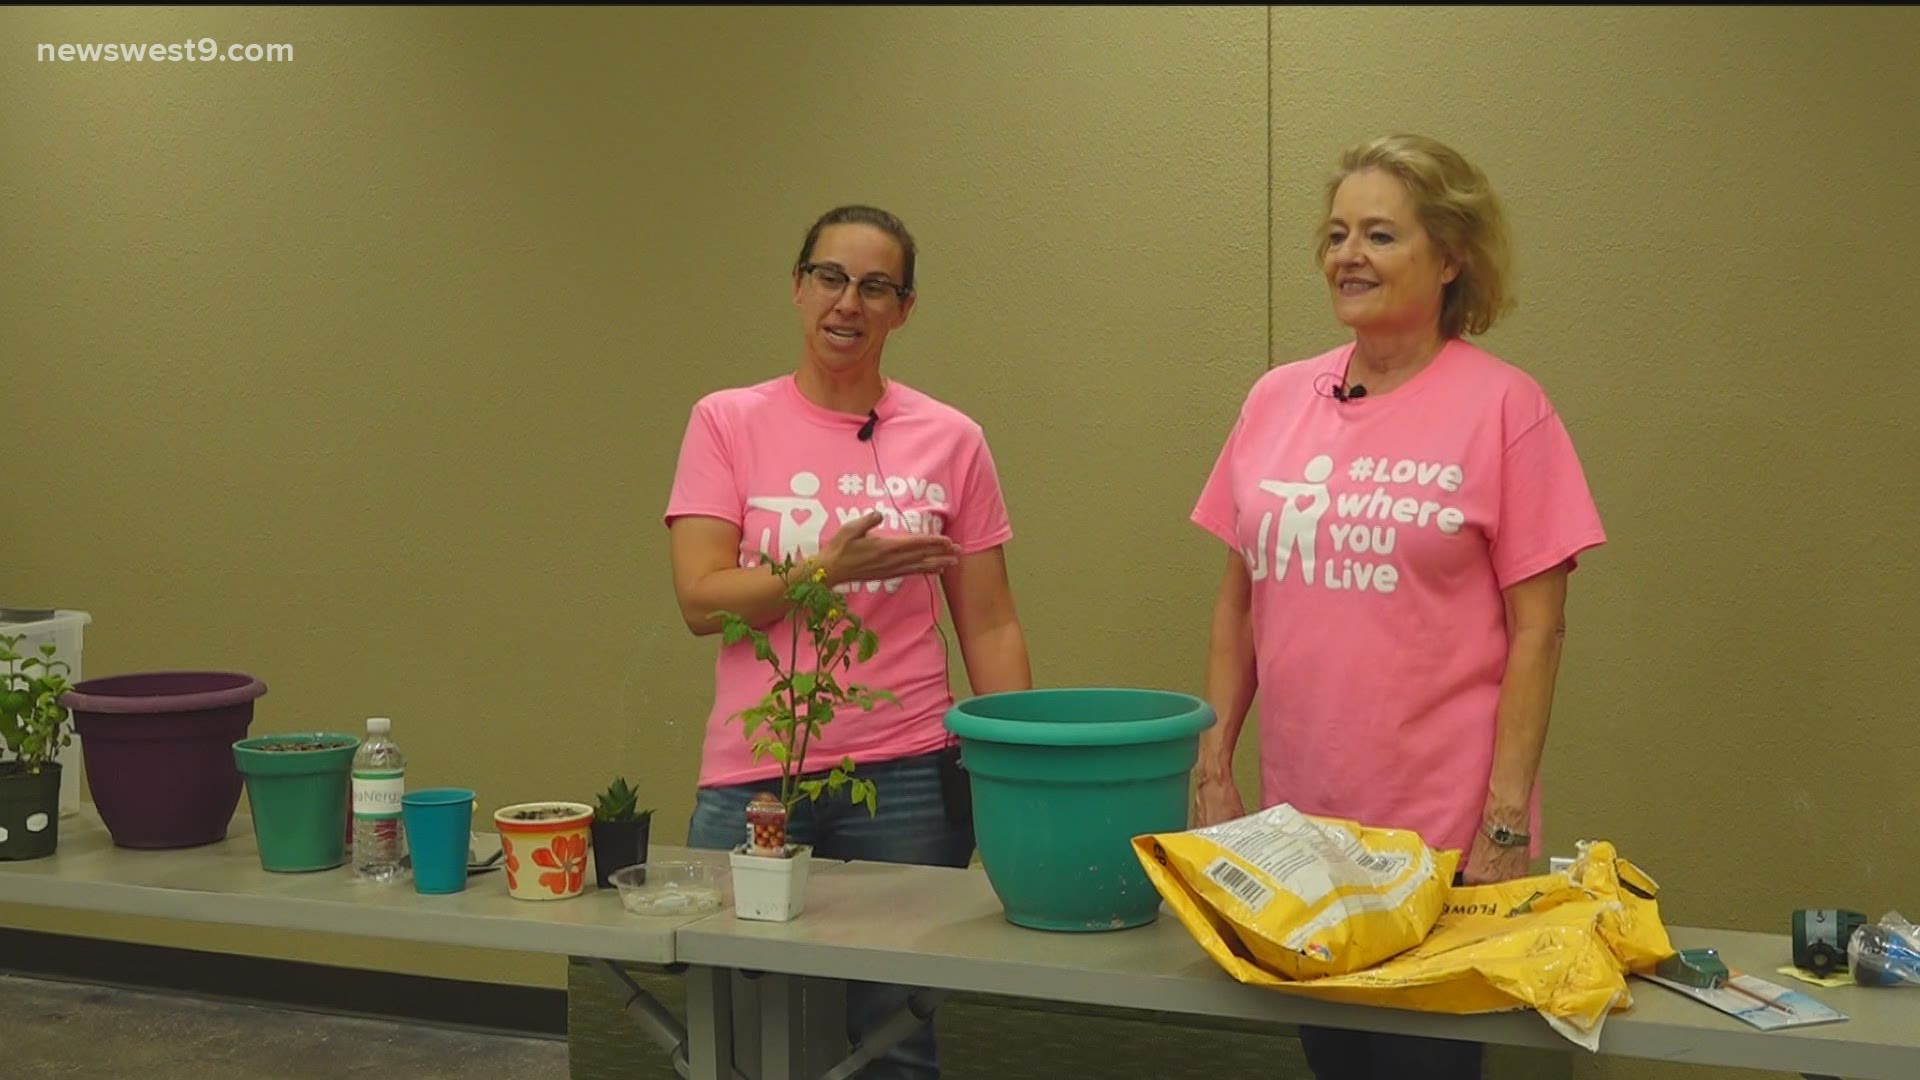 At the event, held on National Gardening Day, representatives from Keep Midland Beautiful discussed the benefits of gardening and how to get started.